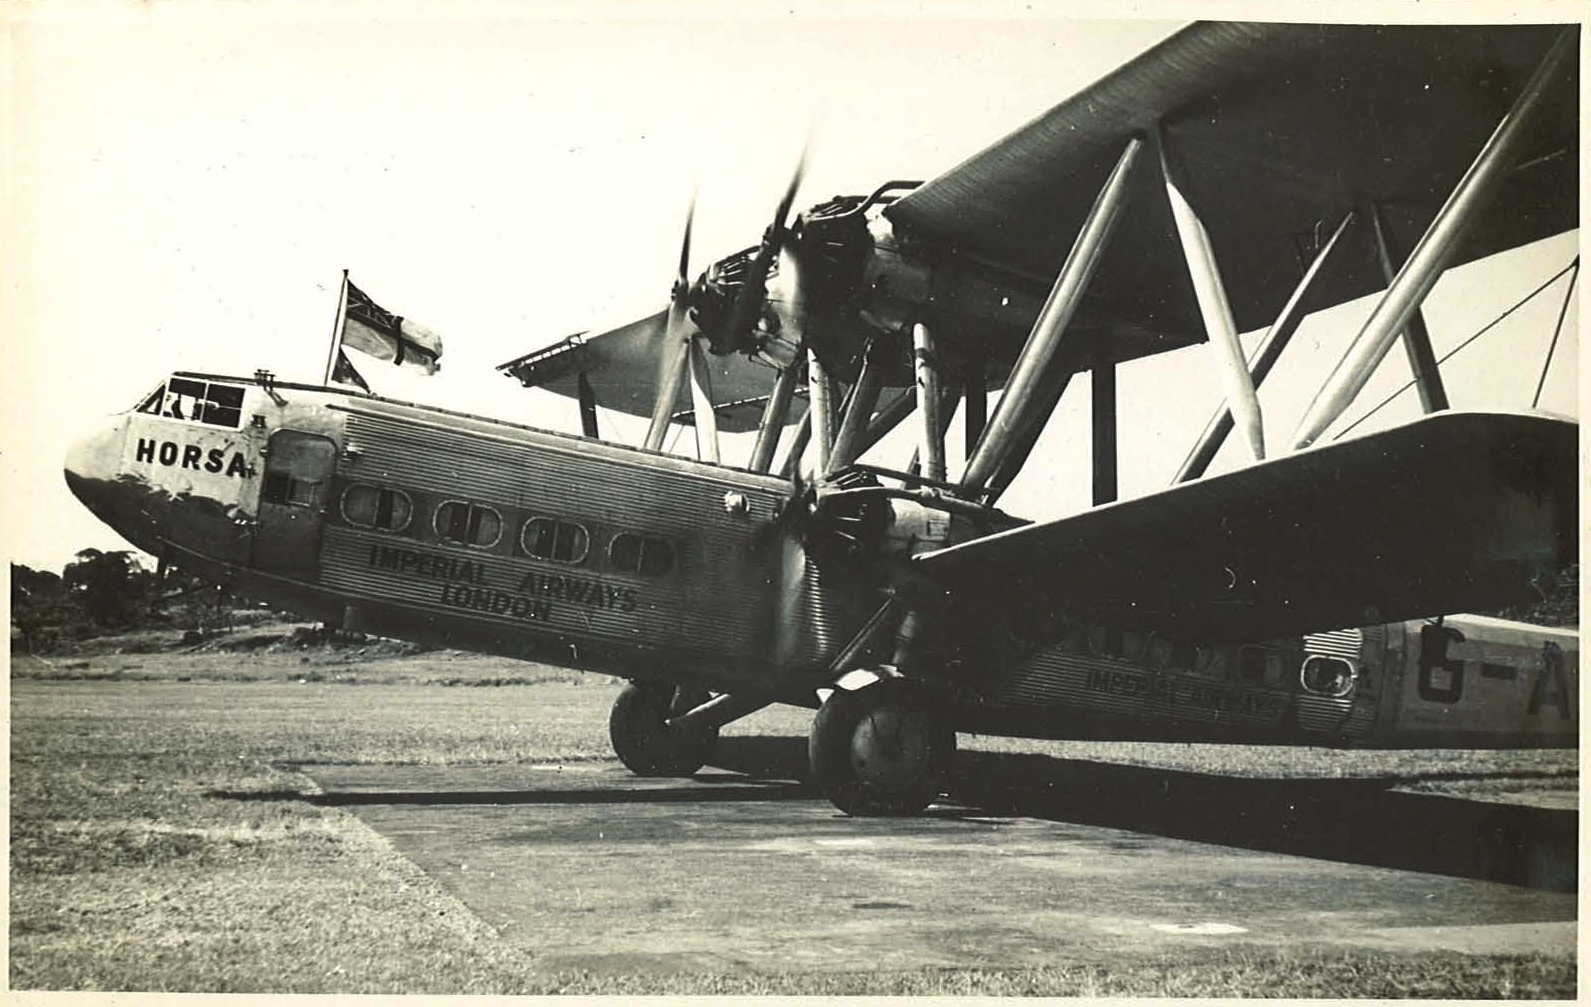 Max flew for Imperial Airways from 1936-38